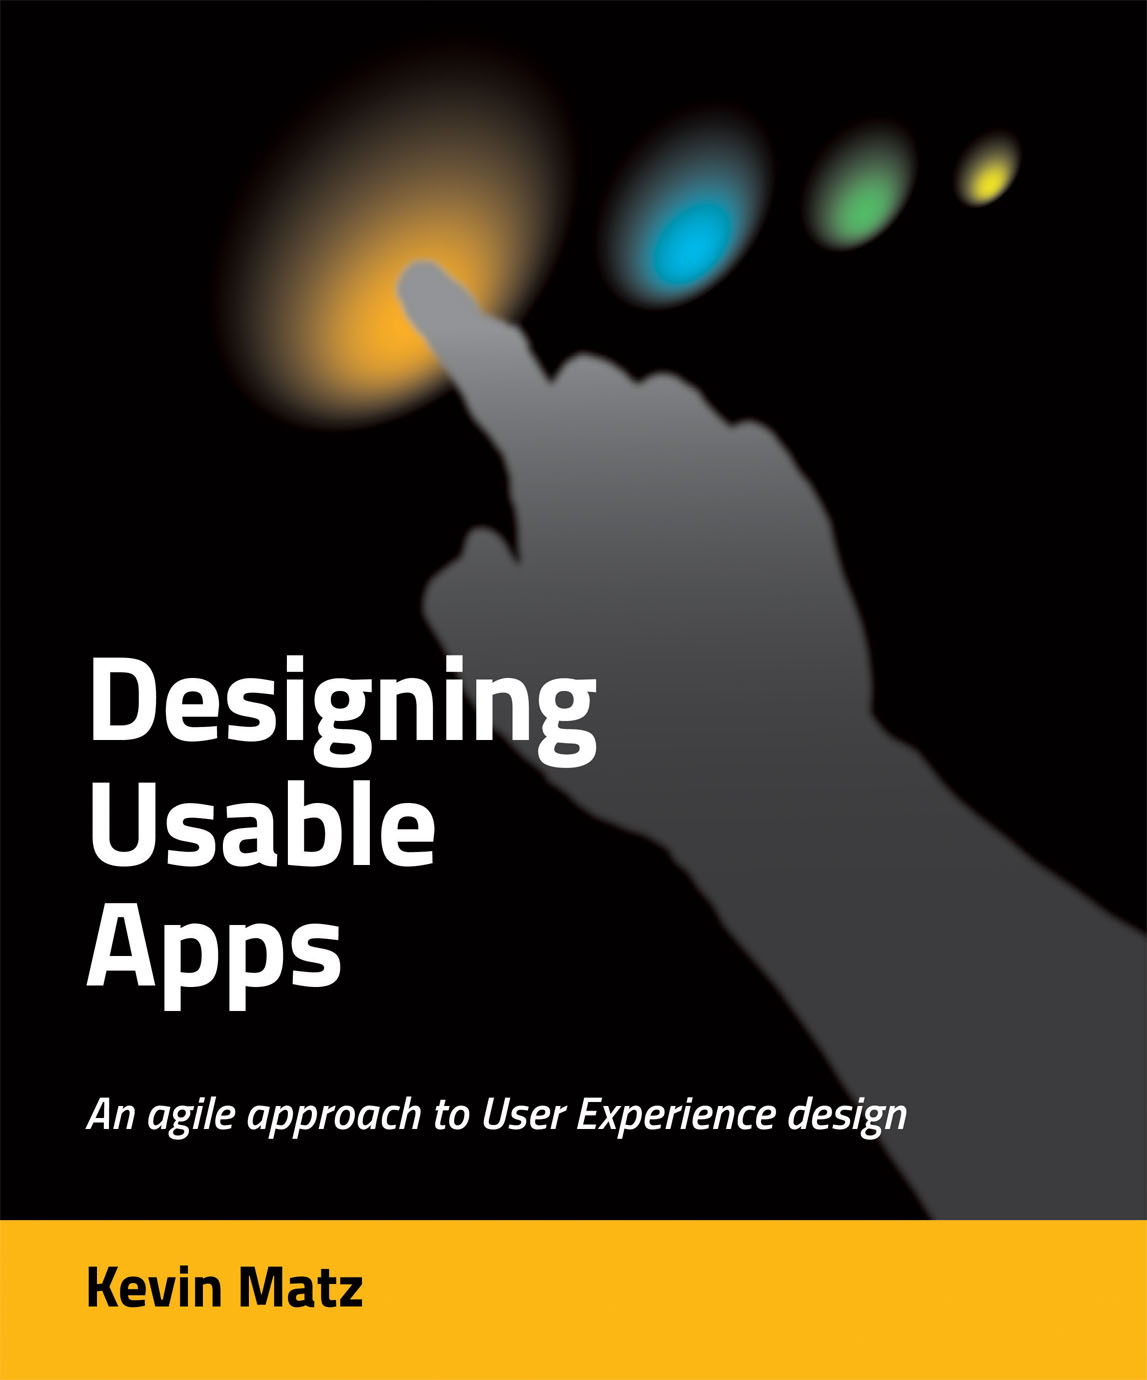 Designing Usable Apps (book cover)